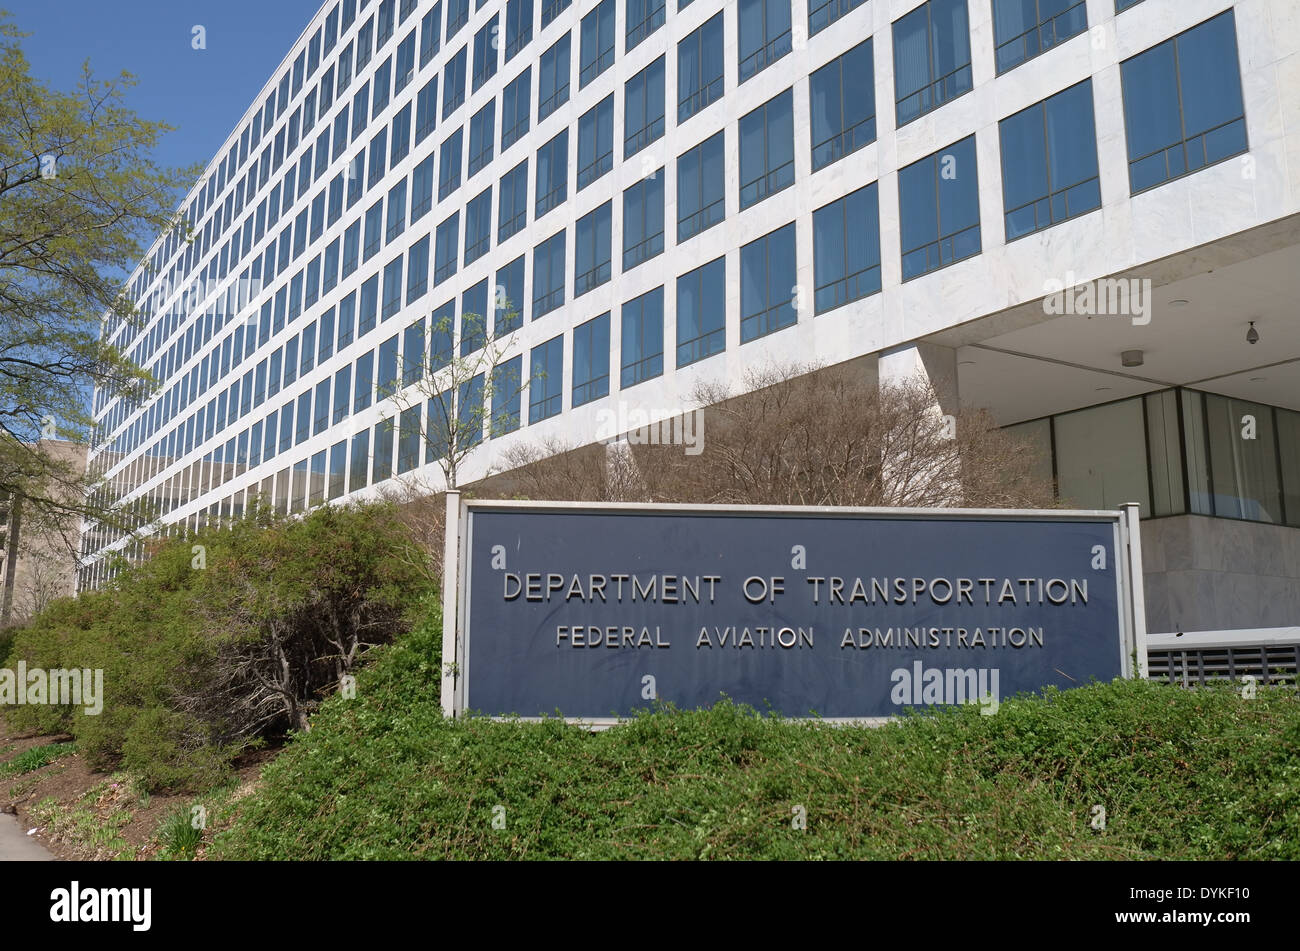 United States Department of Transportation Building Federal Aviation Administration Banque D'Images